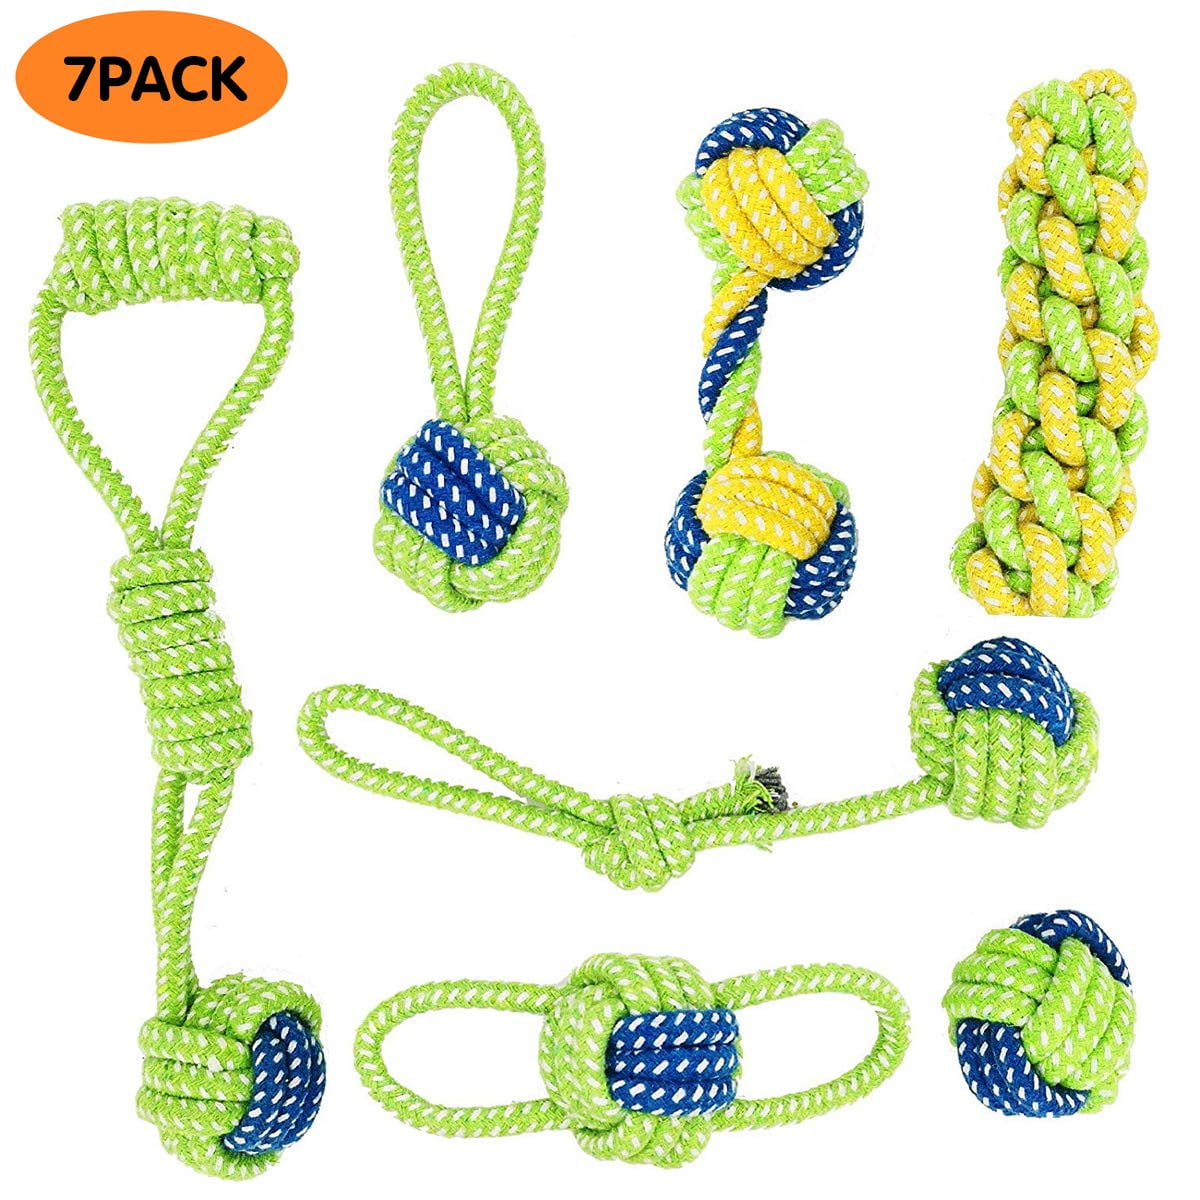 Dog Teething Cleaning as Cotton Chewers for Dog Toys Dog Rope Toys EylbKey Dog Toy for Small to Medium Dogs,Puppy and Pets Dog Training 